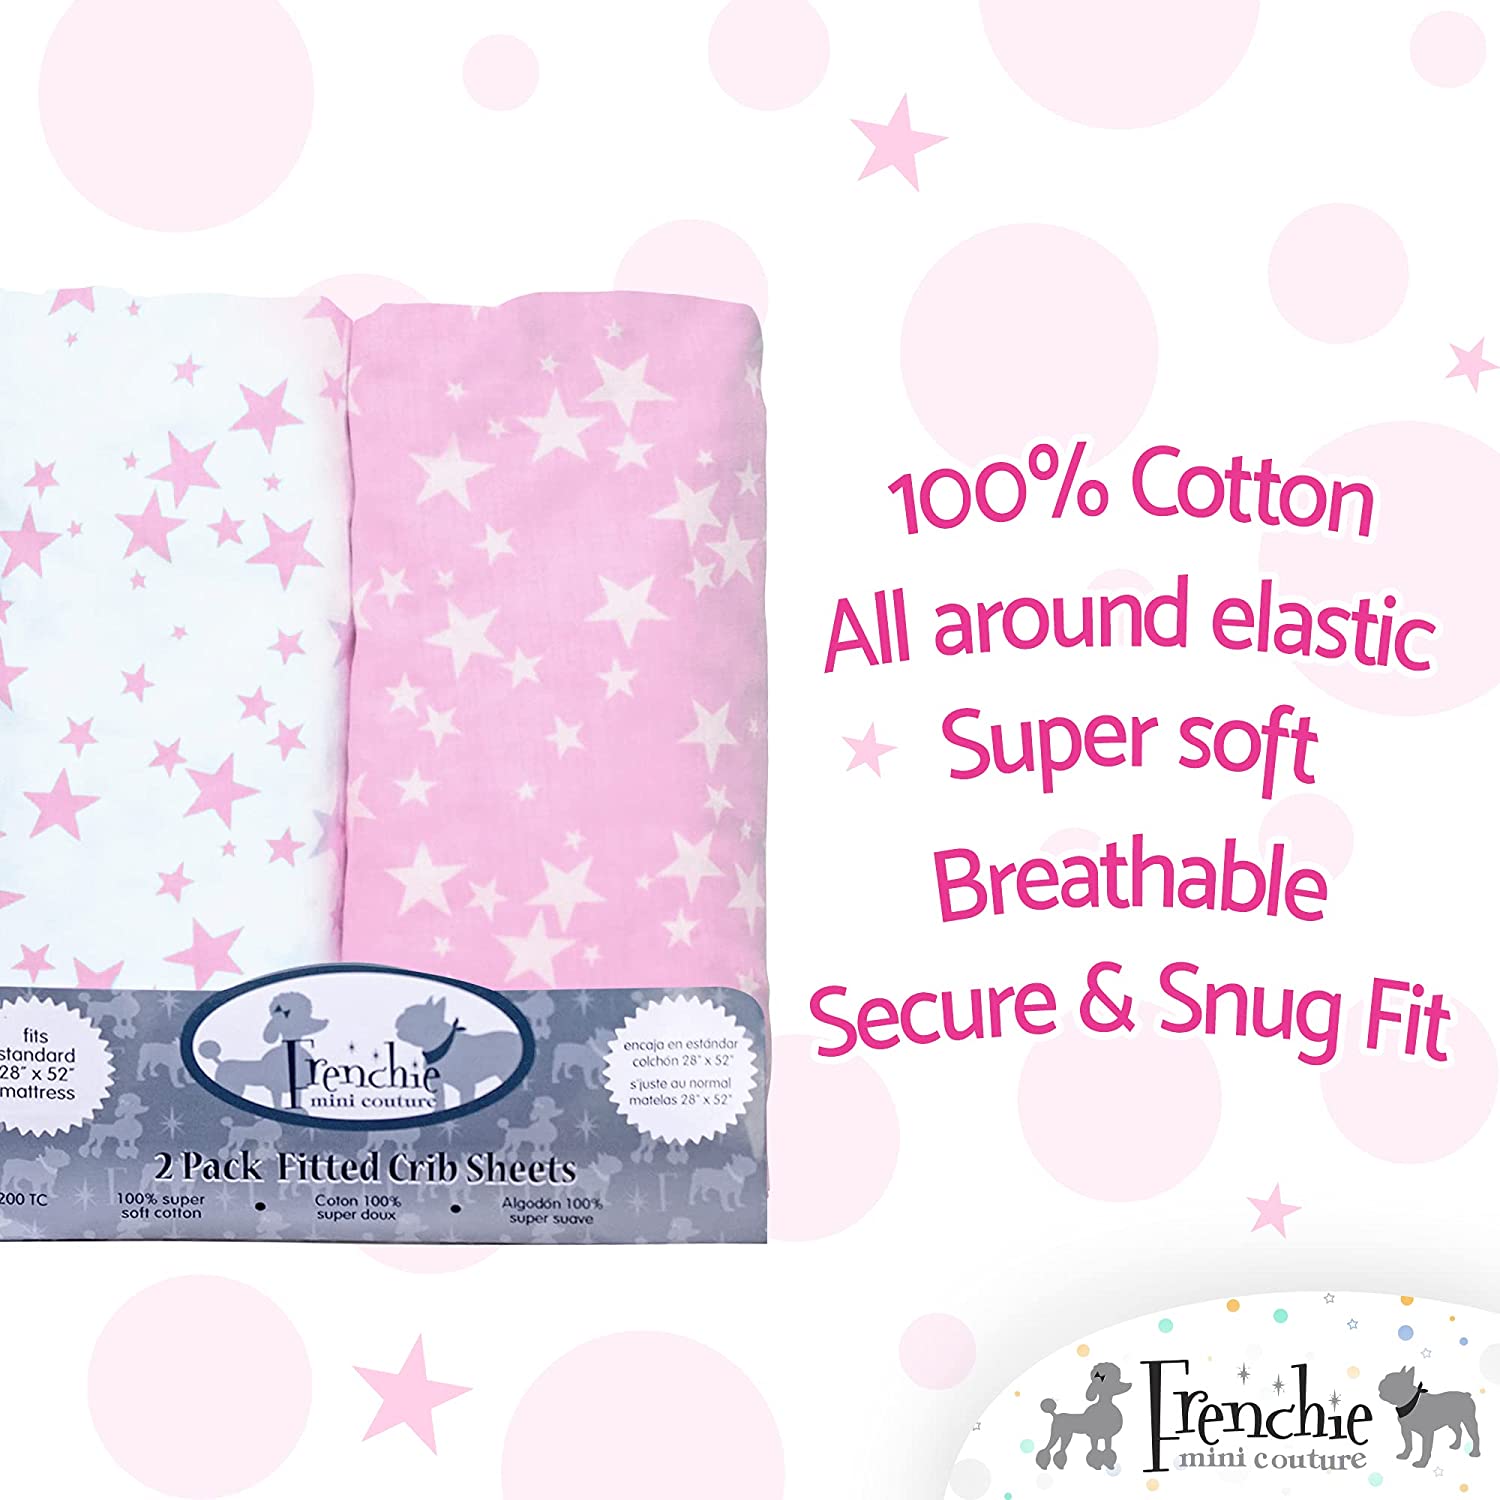 Fitted Crib Sheet 2 Pack, 100% Woven Cotton (Pink Stars )